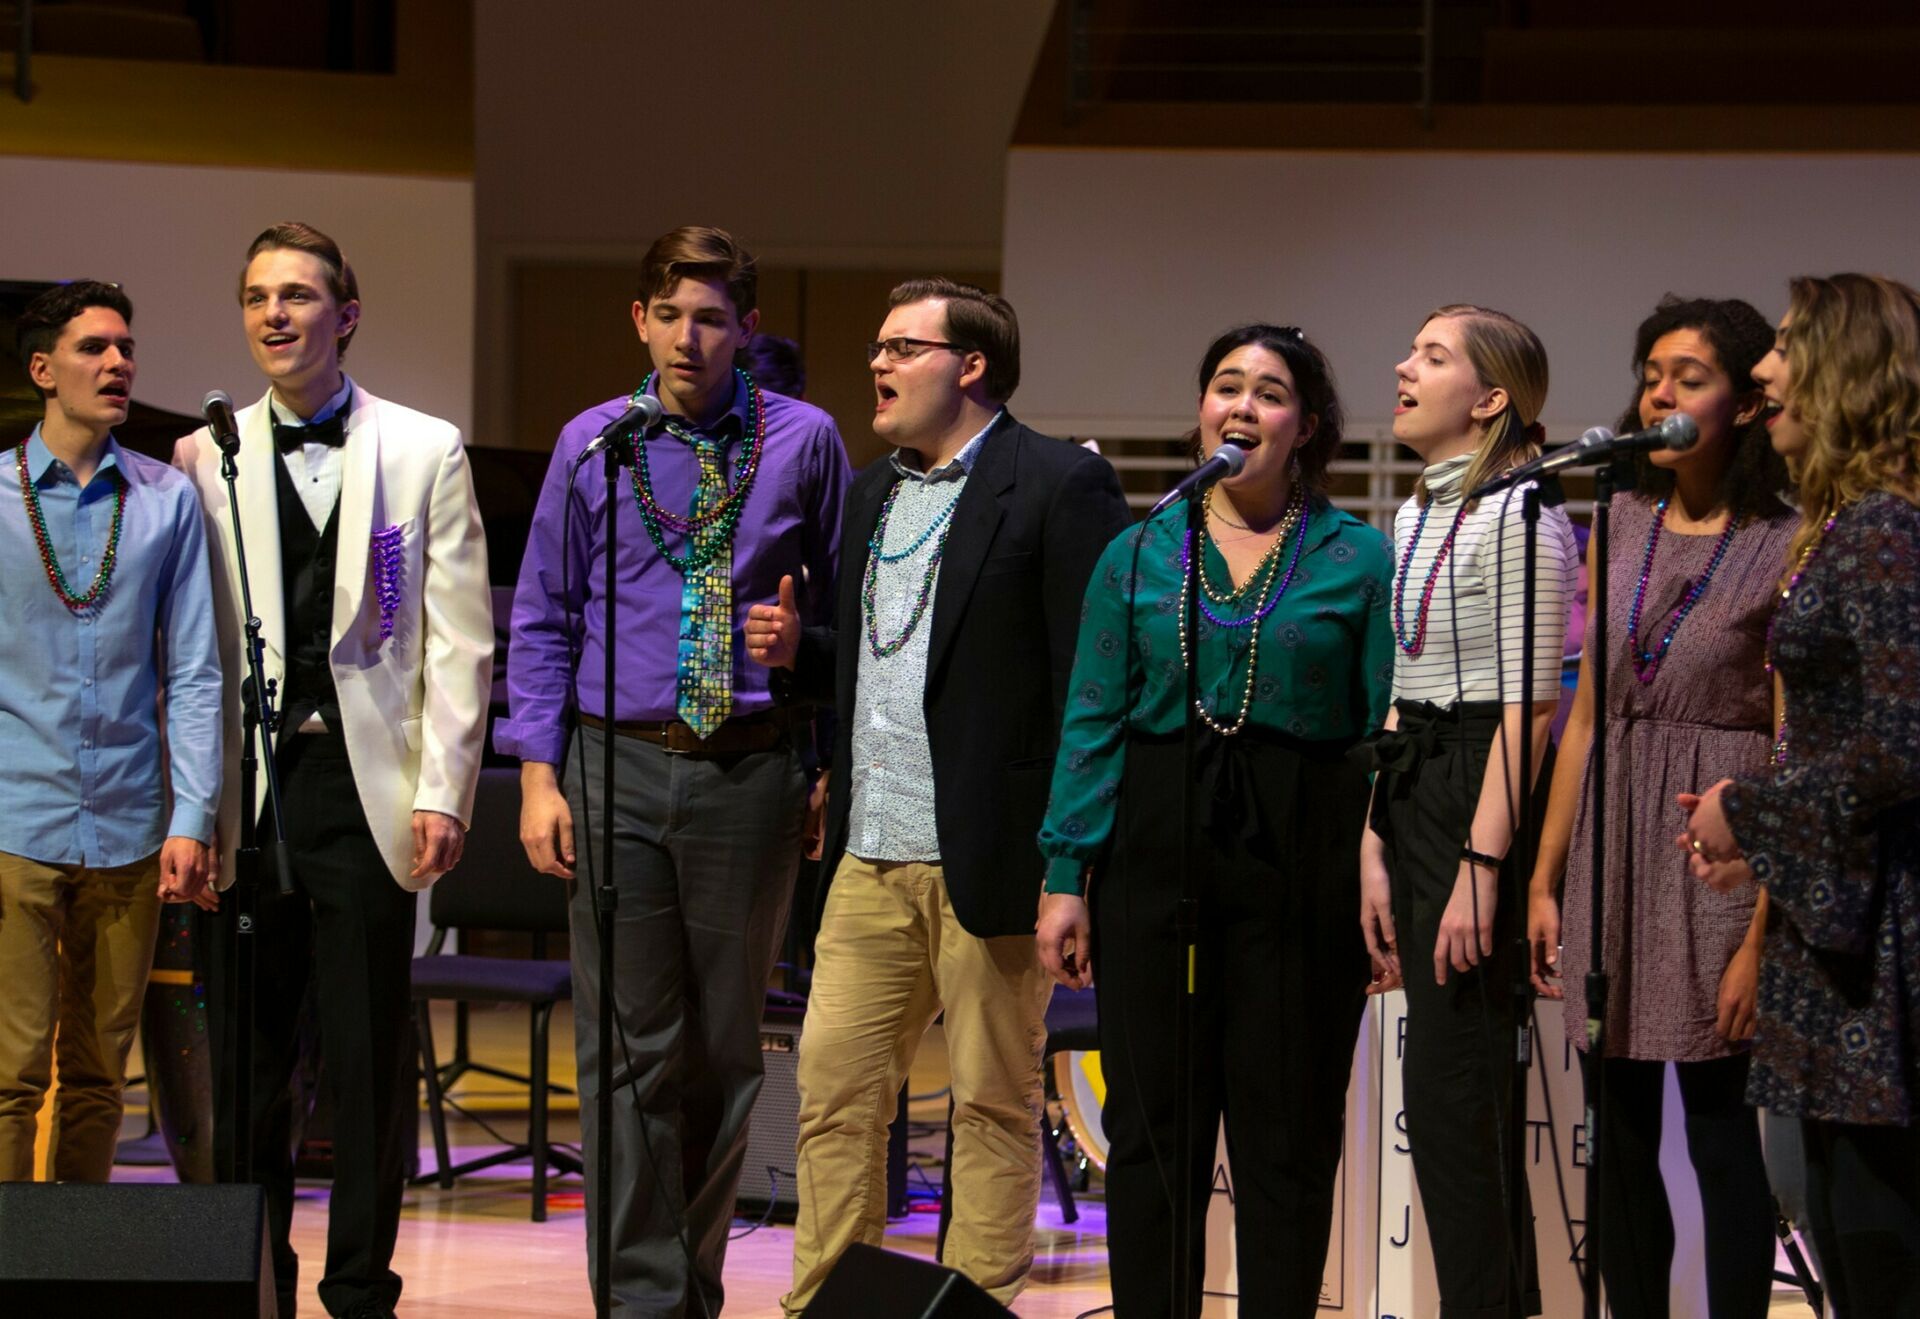 School of Music vocalists performing on stage during the Mardi Gras Jazz Concert at the Recital Hall.